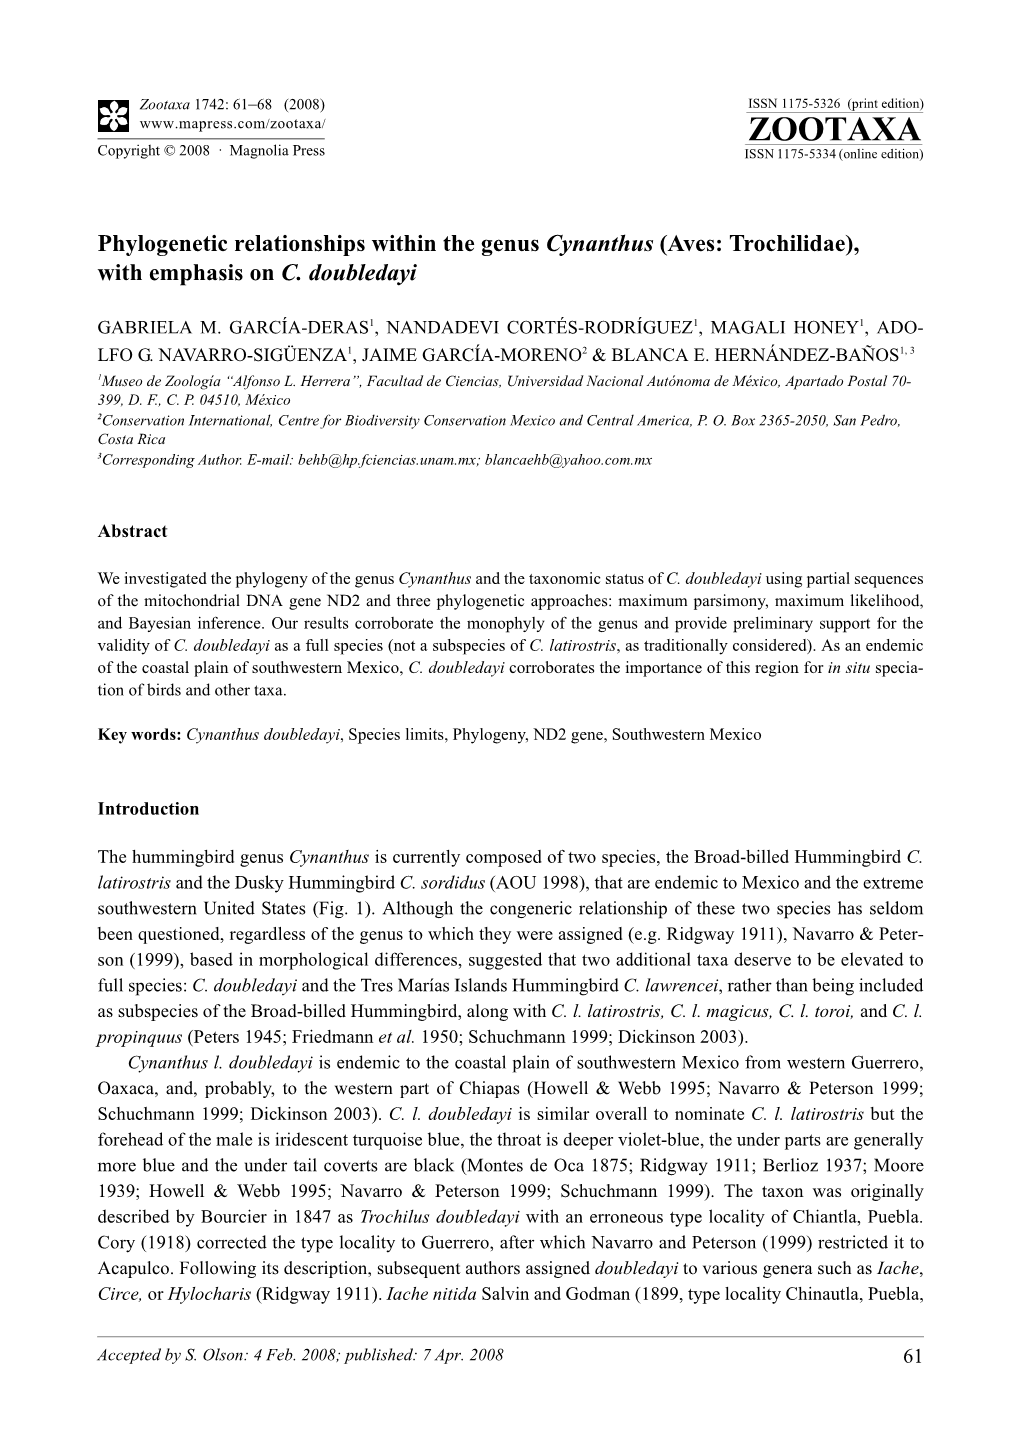 Zootaxa, Phylogenetic Relationships Within the Genus Cynanthus (Aves